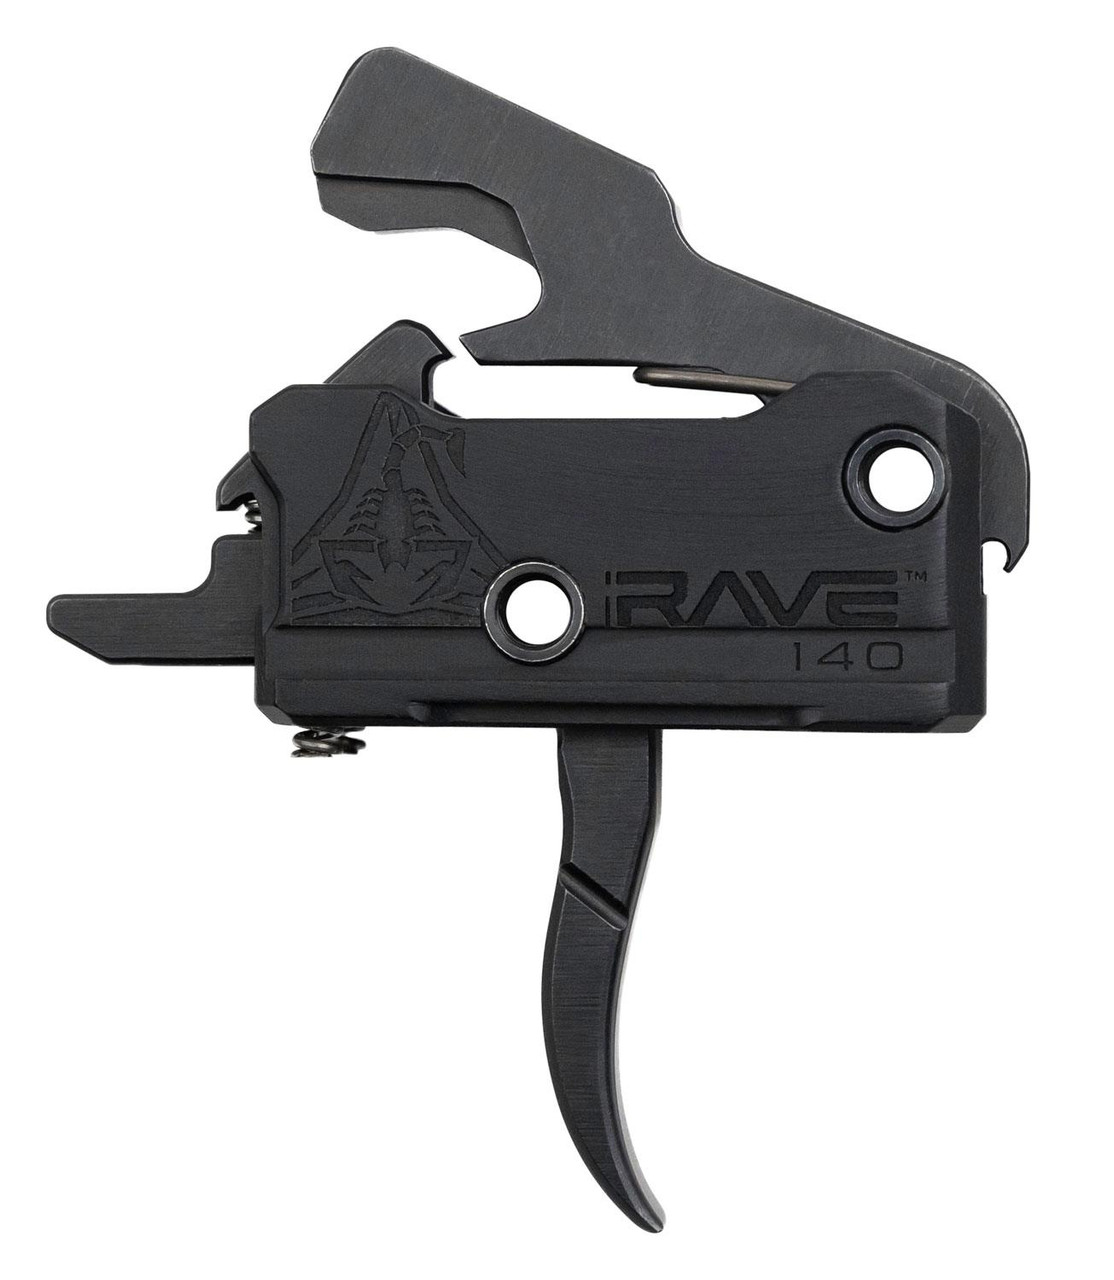 Rave RA-140 Curved Drop In Trigger